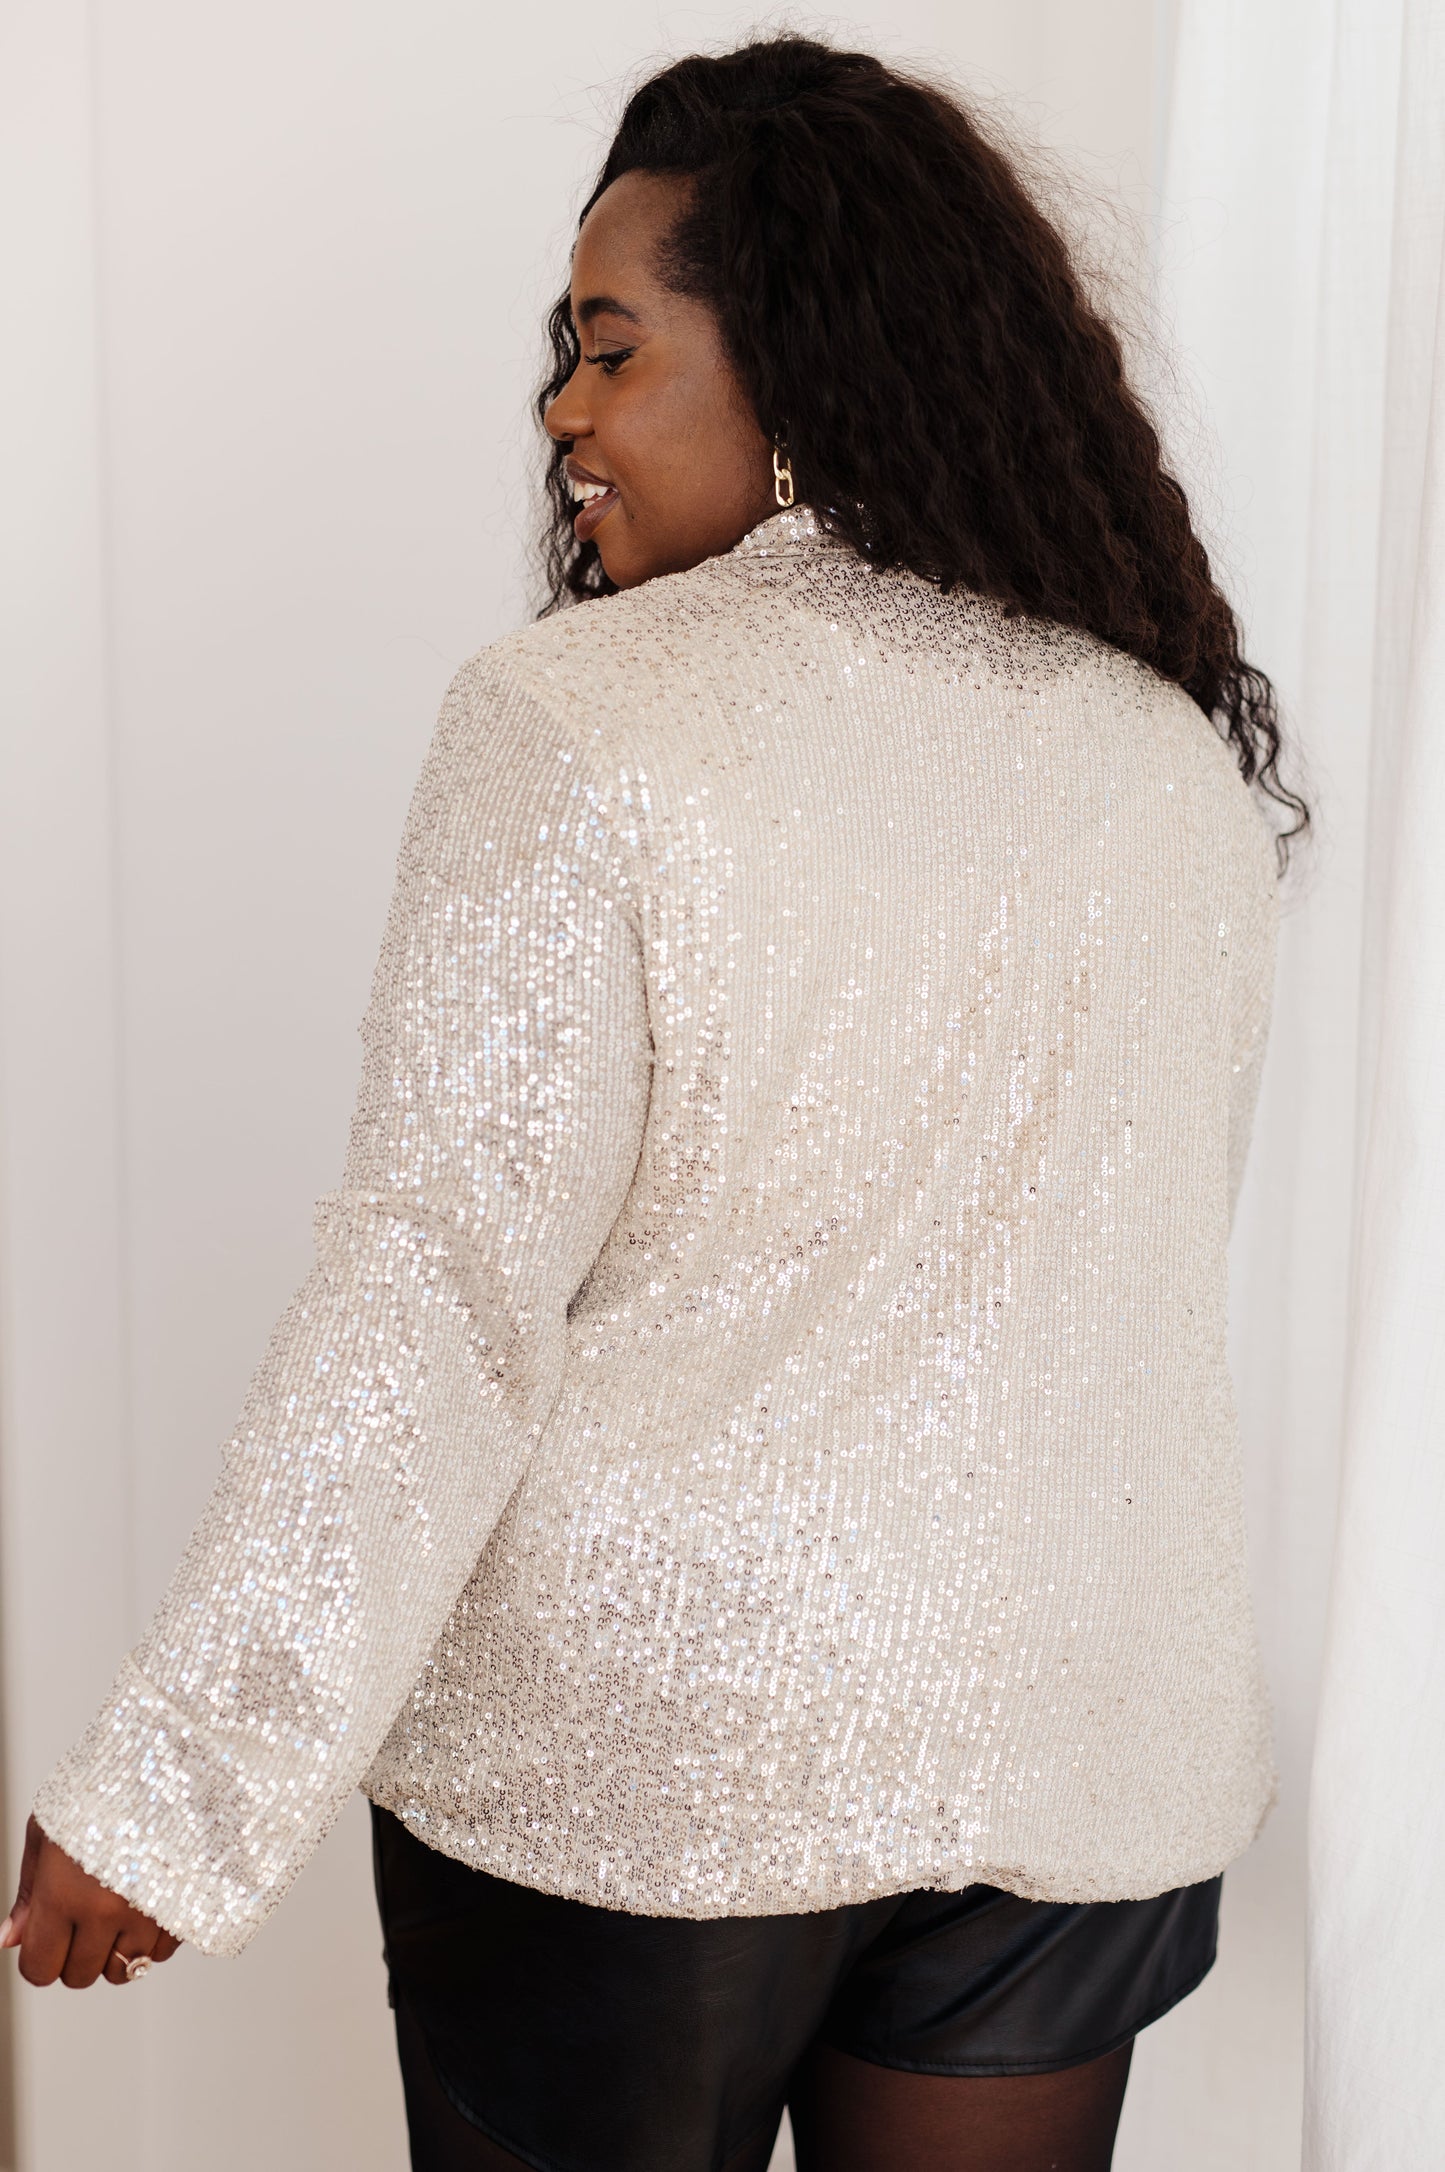 This I Know You're Busy Sequin Blazer will make you a showstopper! Crafted with an all-over silver sequin fabric, this blazer features a notched lapel, pockets, and a relaxed fit. Perfect for a fun evening look! S - 3X